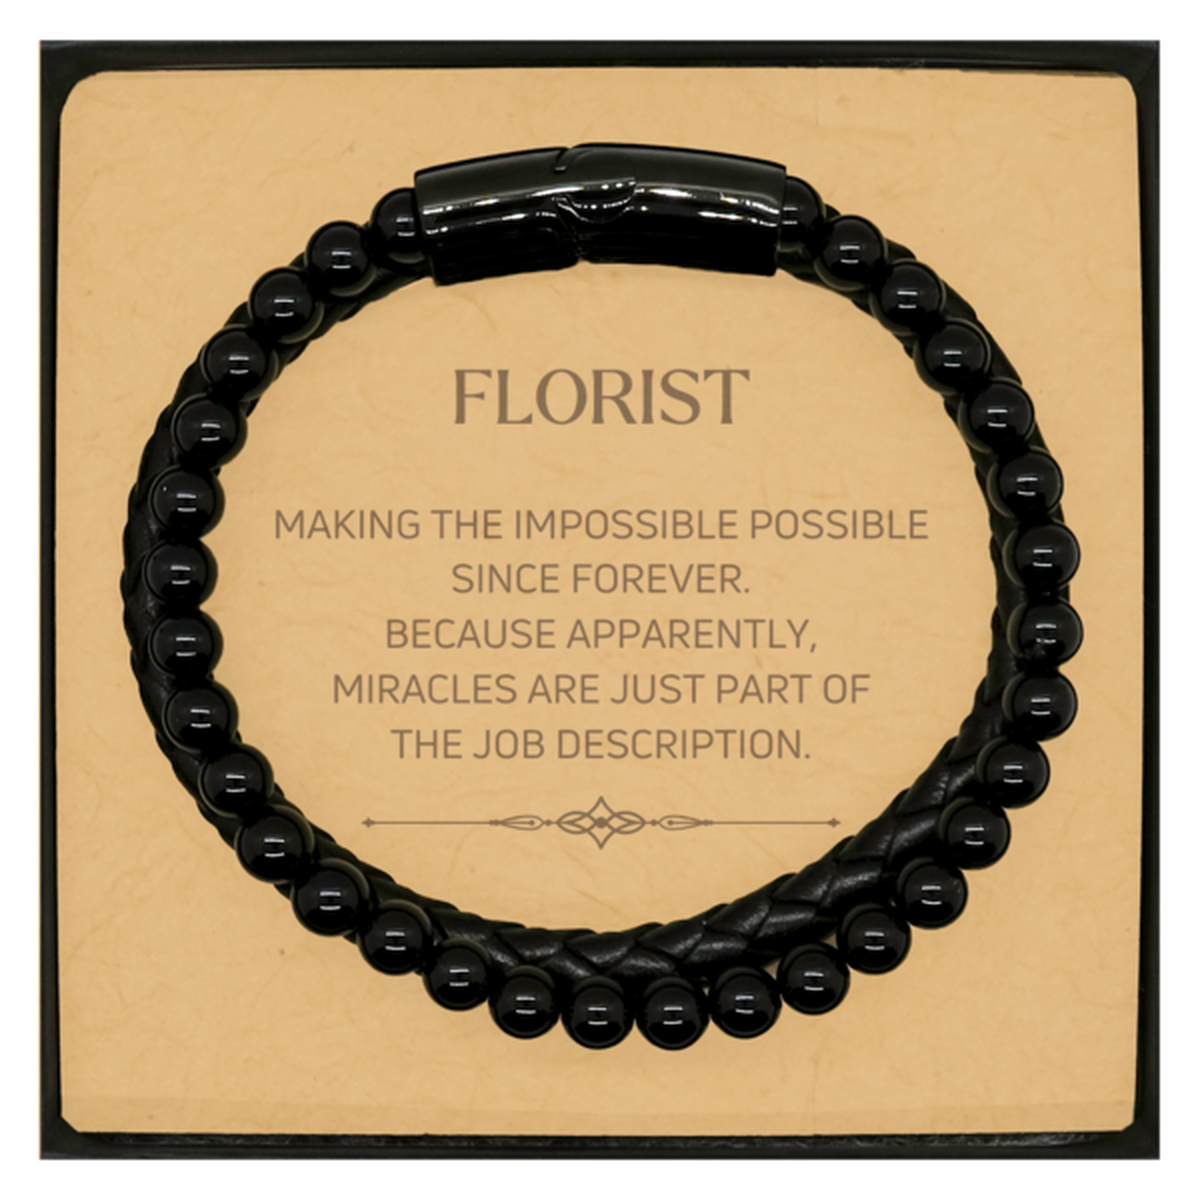 Funny Florist Gifts, Miracles are just part of the job description, Inspirational Birthday Christmas Stone Leather Bracelets For Florist, Men, Women, Coworkers, Friends, Boss